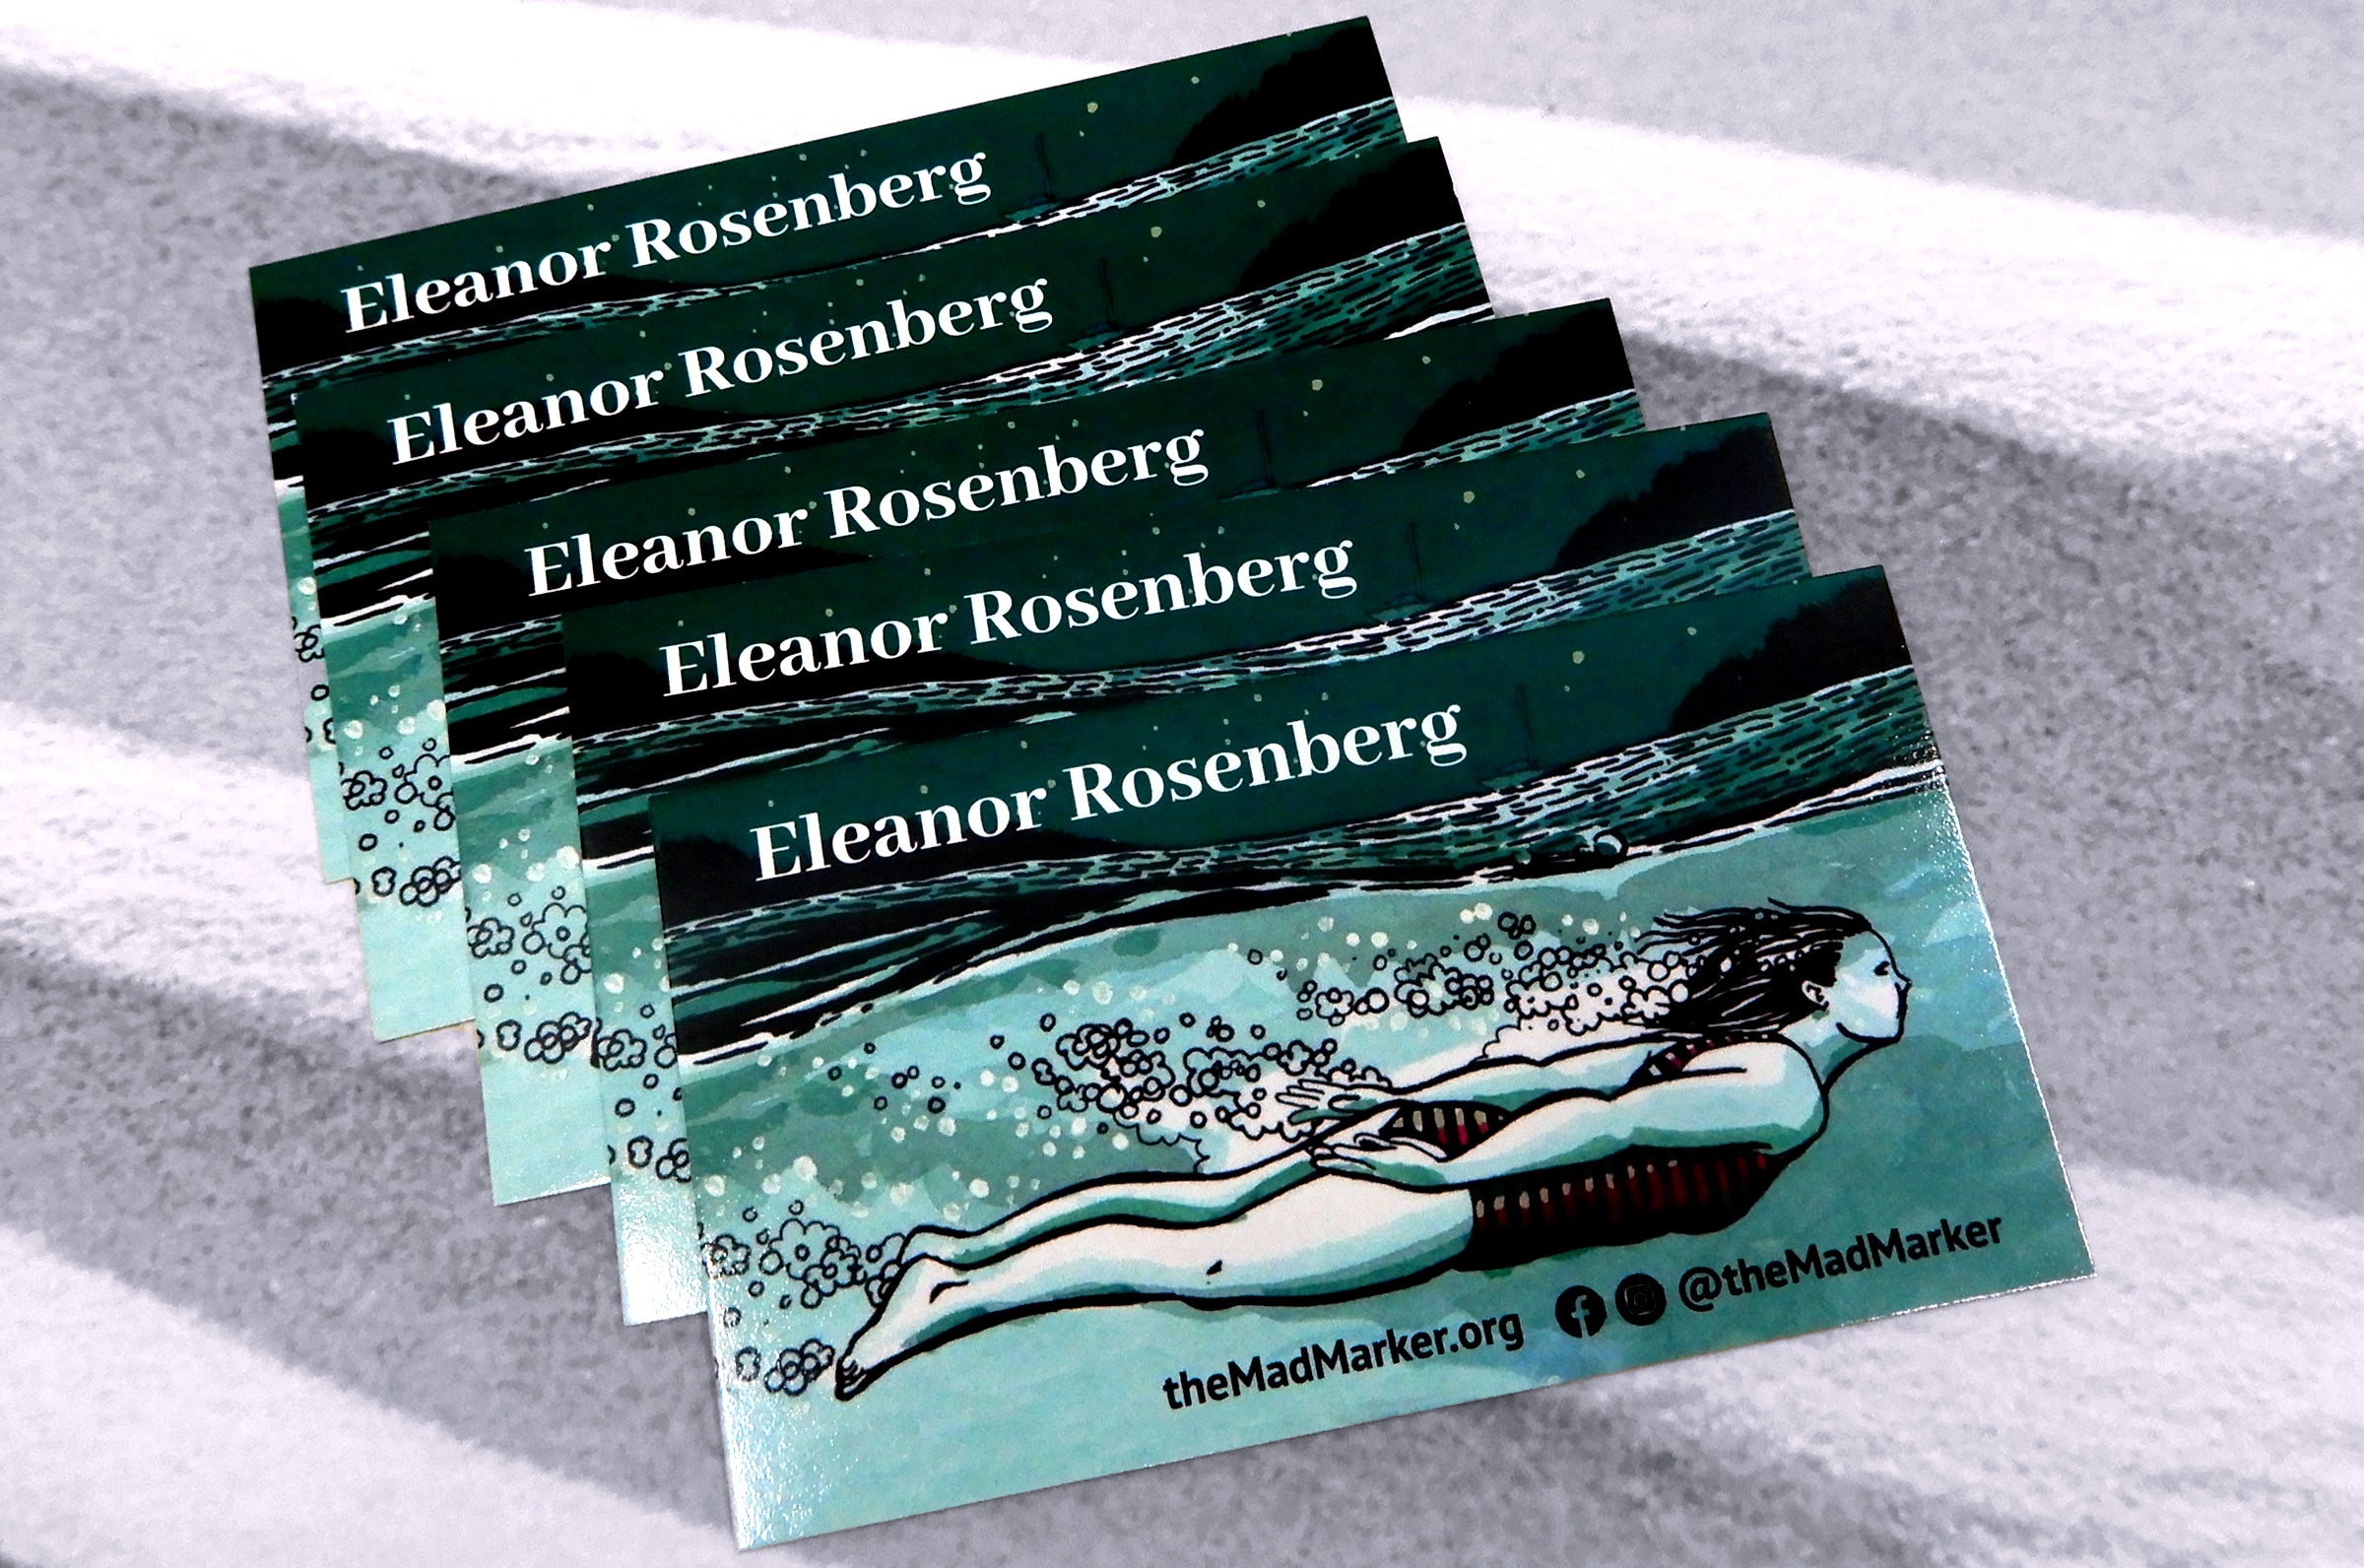 Custom business cards for Eleanor Rosenberg printed in full color on 16pt coated card stock | Clubcard Printing USA